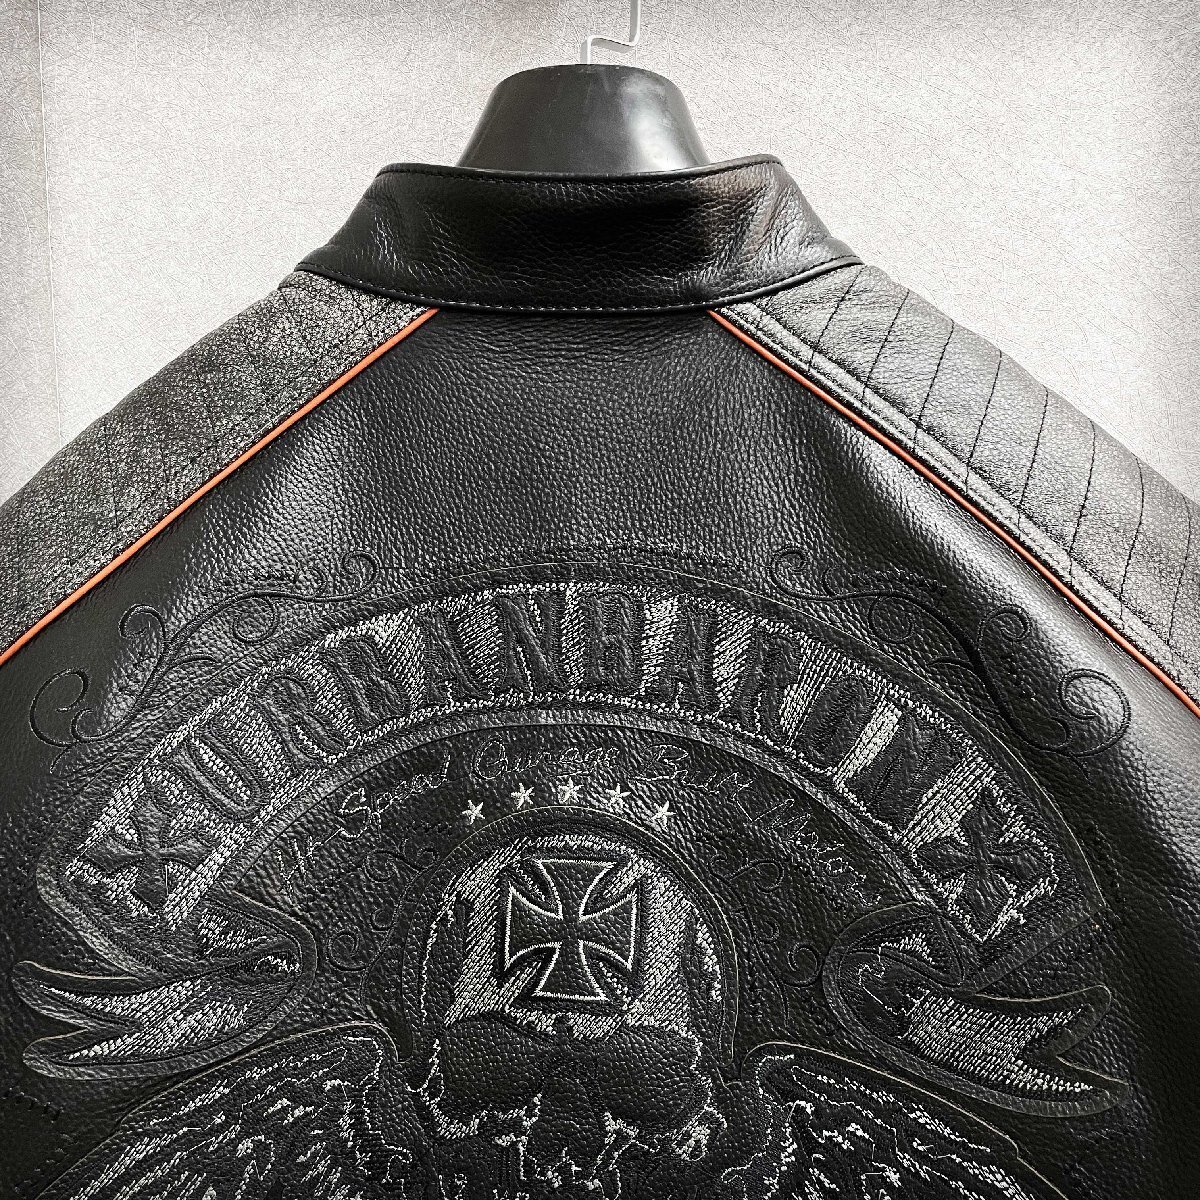  piece .* Rider's regular price 16 ten thousand *Emmauela* Italy * milano departure * fine quality cow leather -ply thickness USAF*TYPE Skull embroidery original leather leather jacket L/48 size 